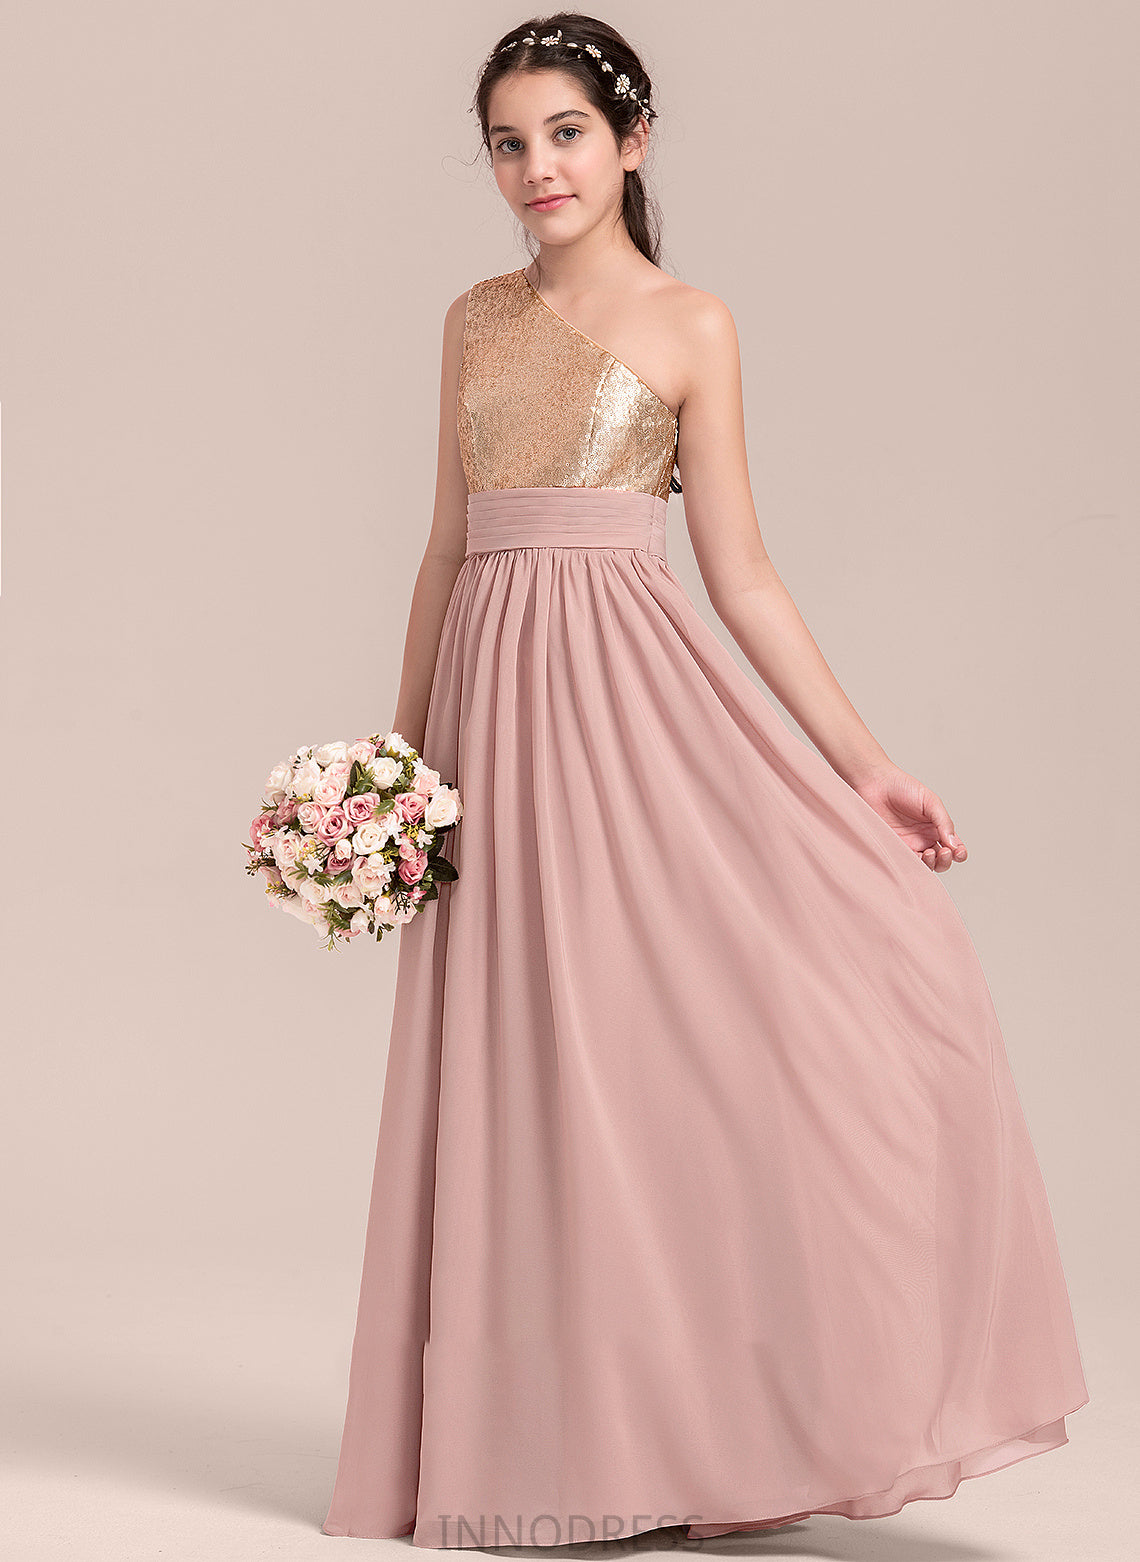 With Floor-Length Junior Bridesmaid Dresses One-Shoulder Baylee Ruffle A-Line Chiffon